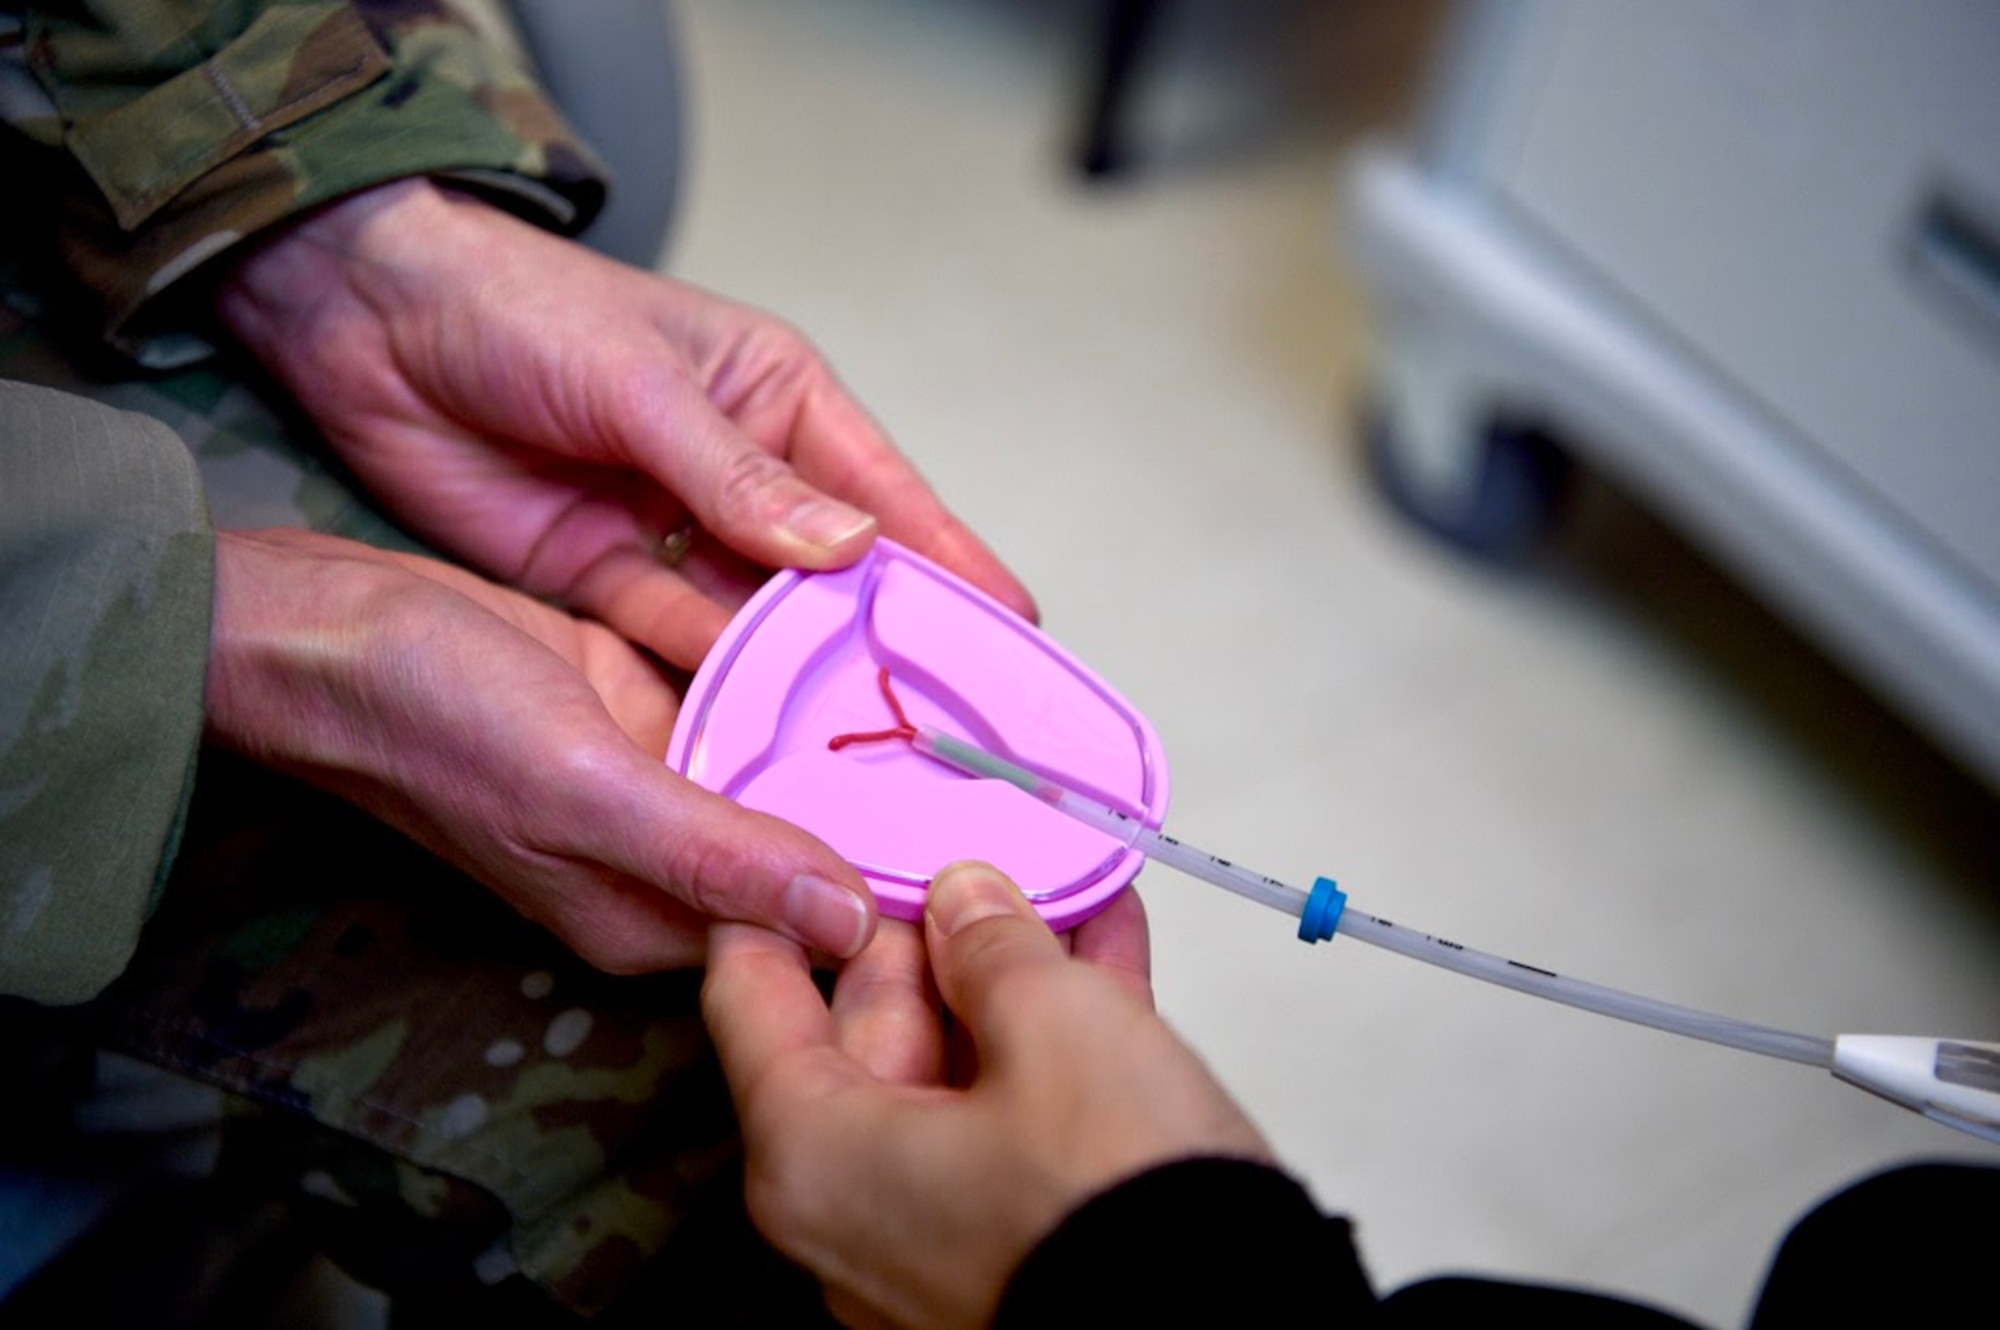 Lt. Col. Paula Neemann, 15th Healthcare Operations Squadron clinical medicine flight commander, demonstrates several birth options, such as an intrauterine device, at the 15th MDG’s contraceptive clinic at Joint Base Pearl Harbor-Hickam, Hawaii, May 6, 2021. The contraceptive clinic opened June 7 to service beneficiaries and provide same-day procedures without a referral. (U.S. Air Force photo by 2nd Lt. Benjamin Aronson)